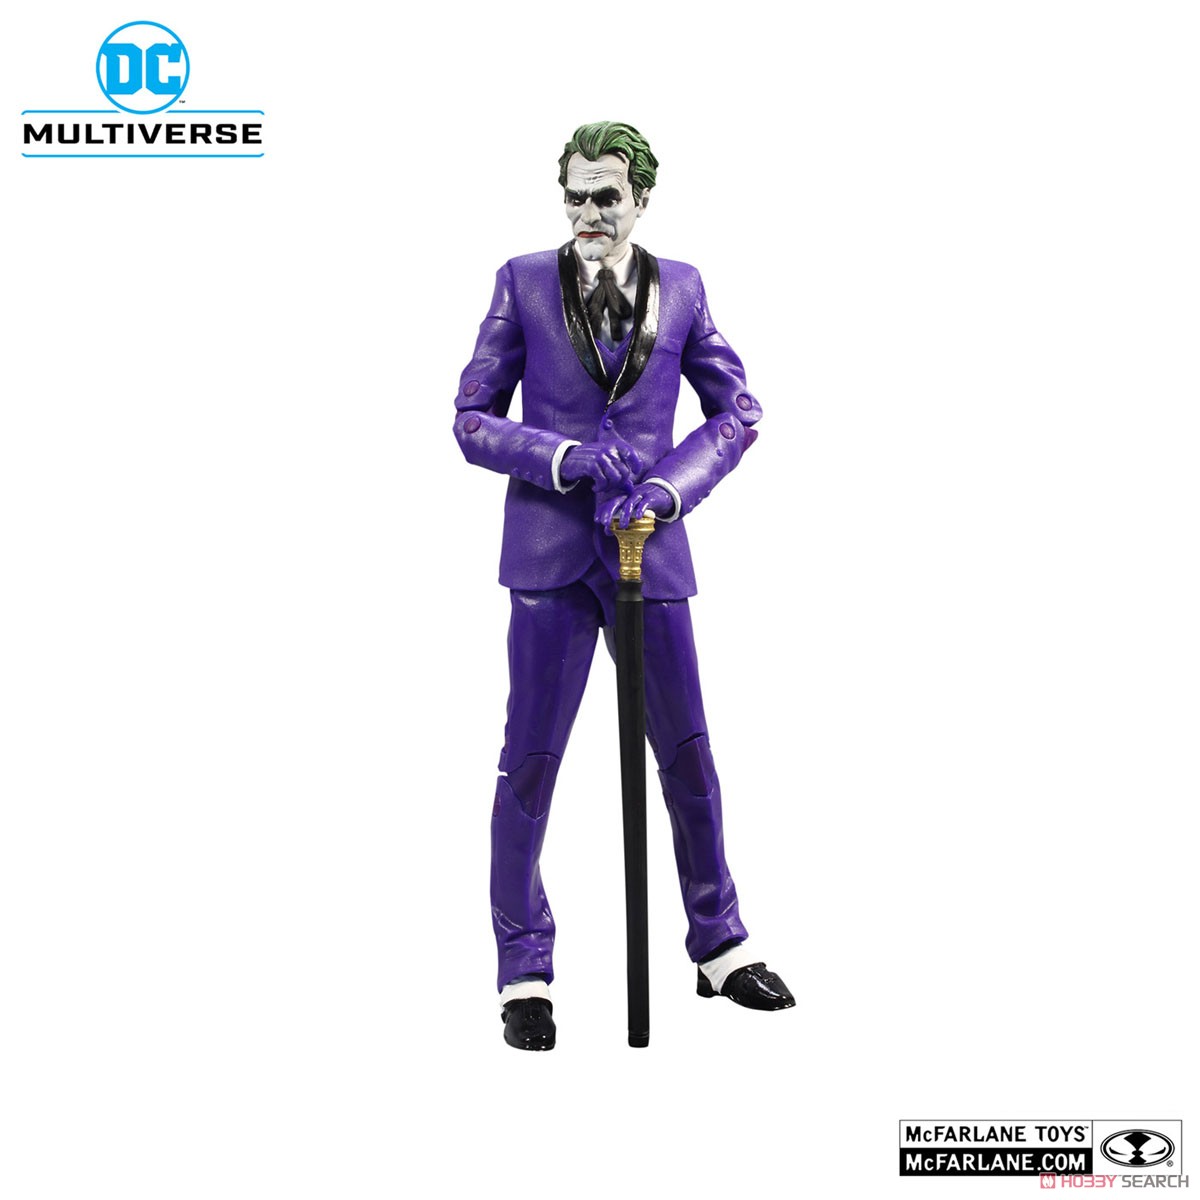 DC Comics - DC Multiverse: 7 Inch Action Figure - #087 The Joker (The Criminal) [Comic / Batman: Three Jokers] (Completed) Item picture6